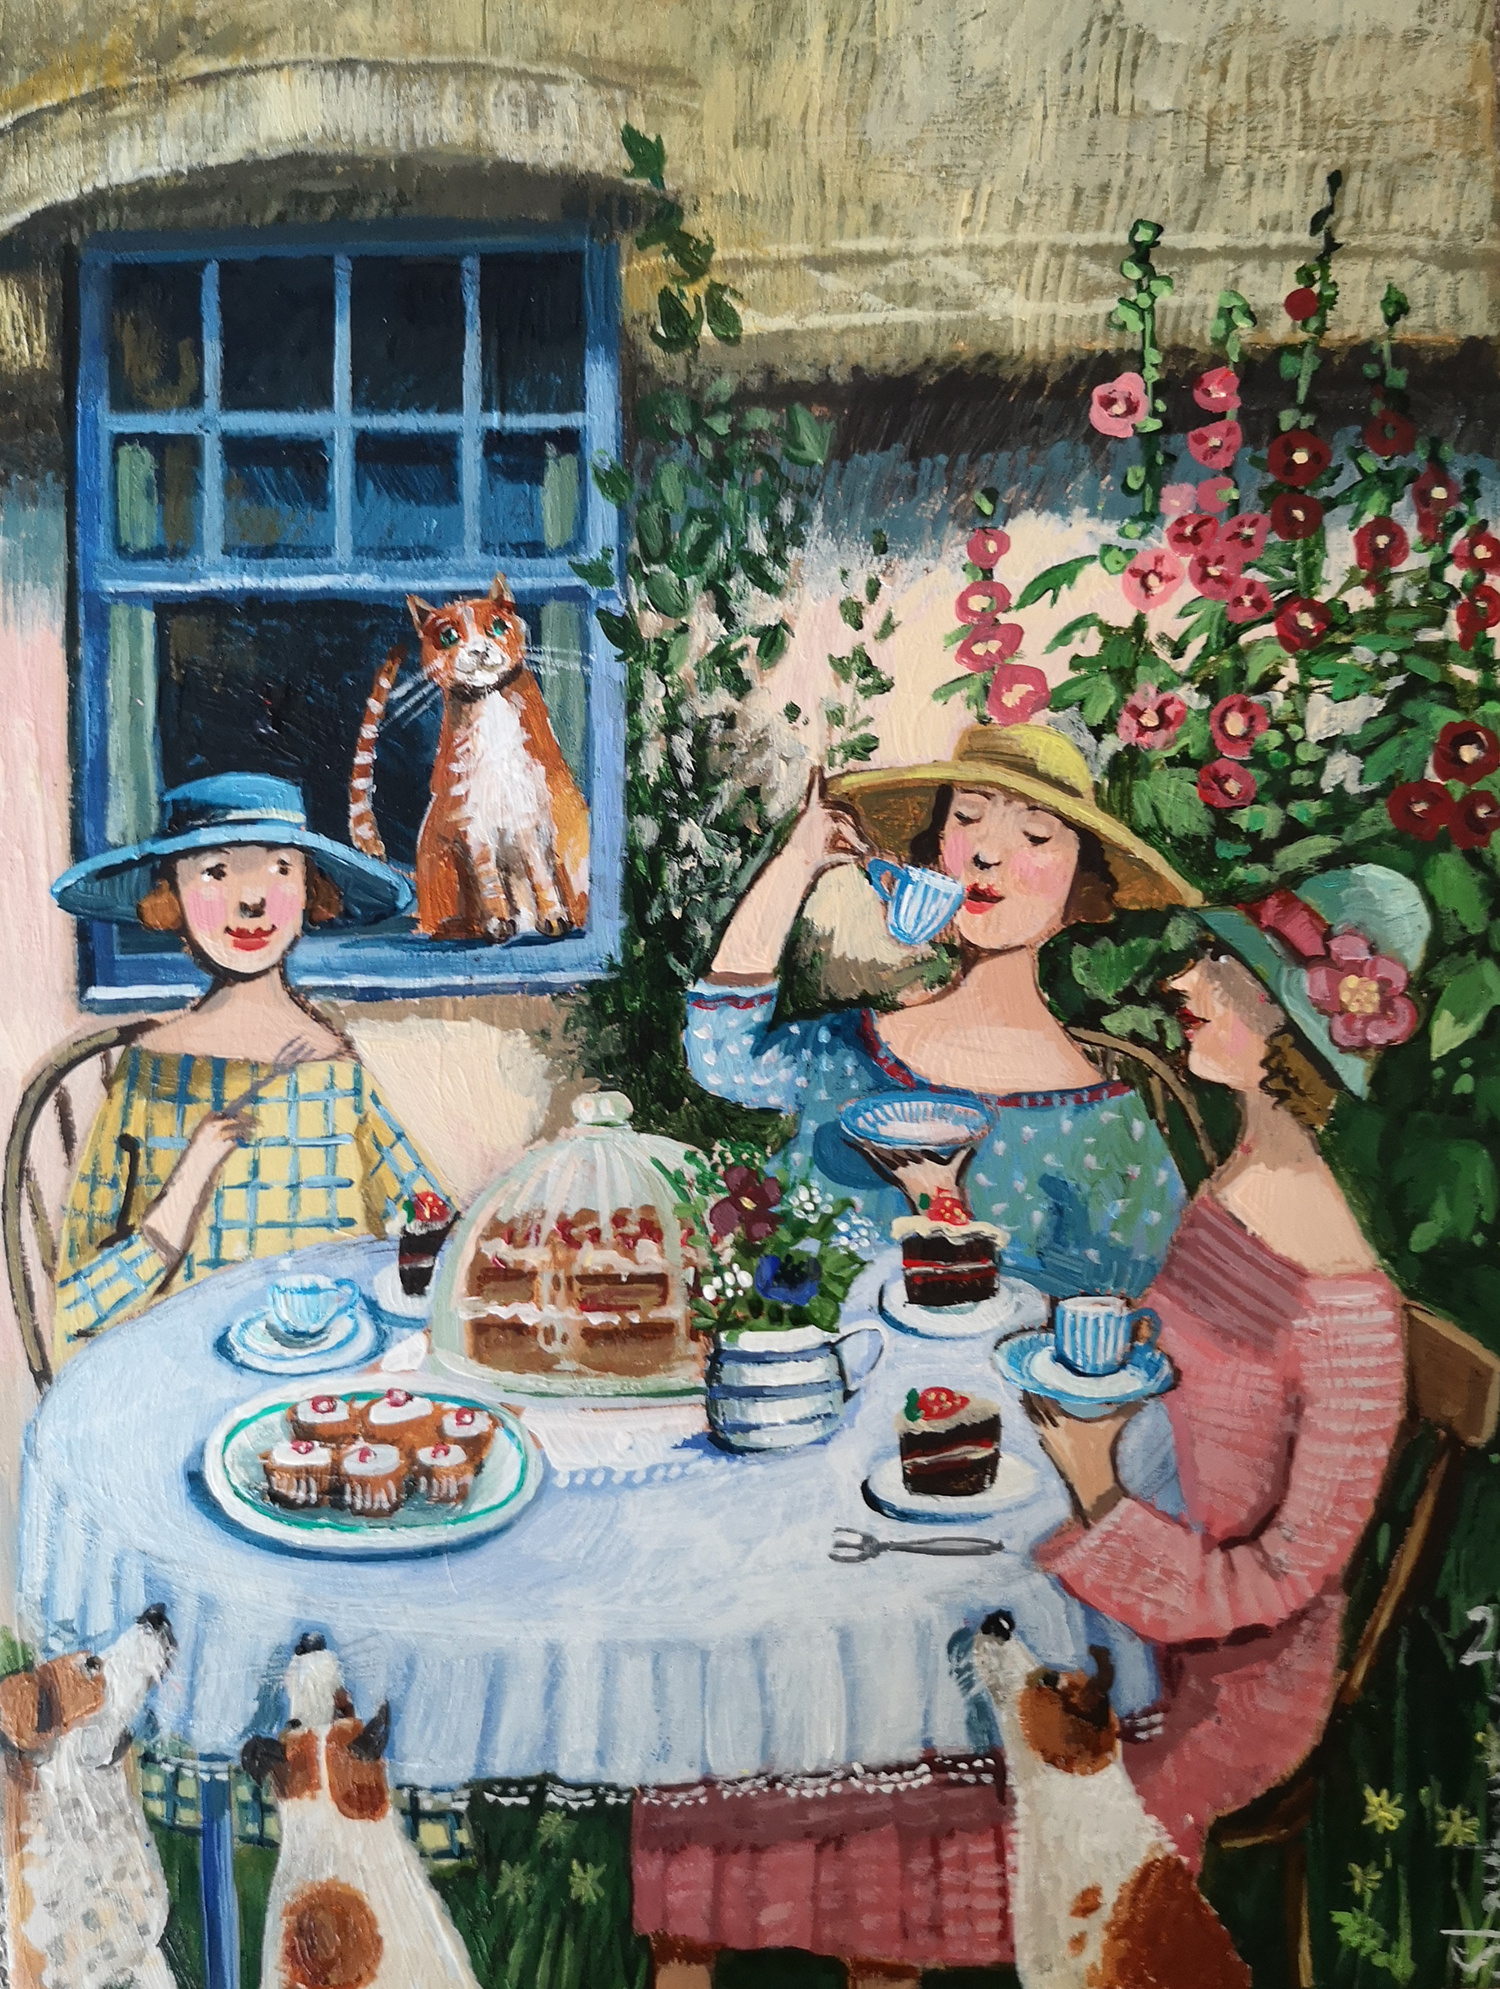 Afternoon Tea by Stephanie Lambourne